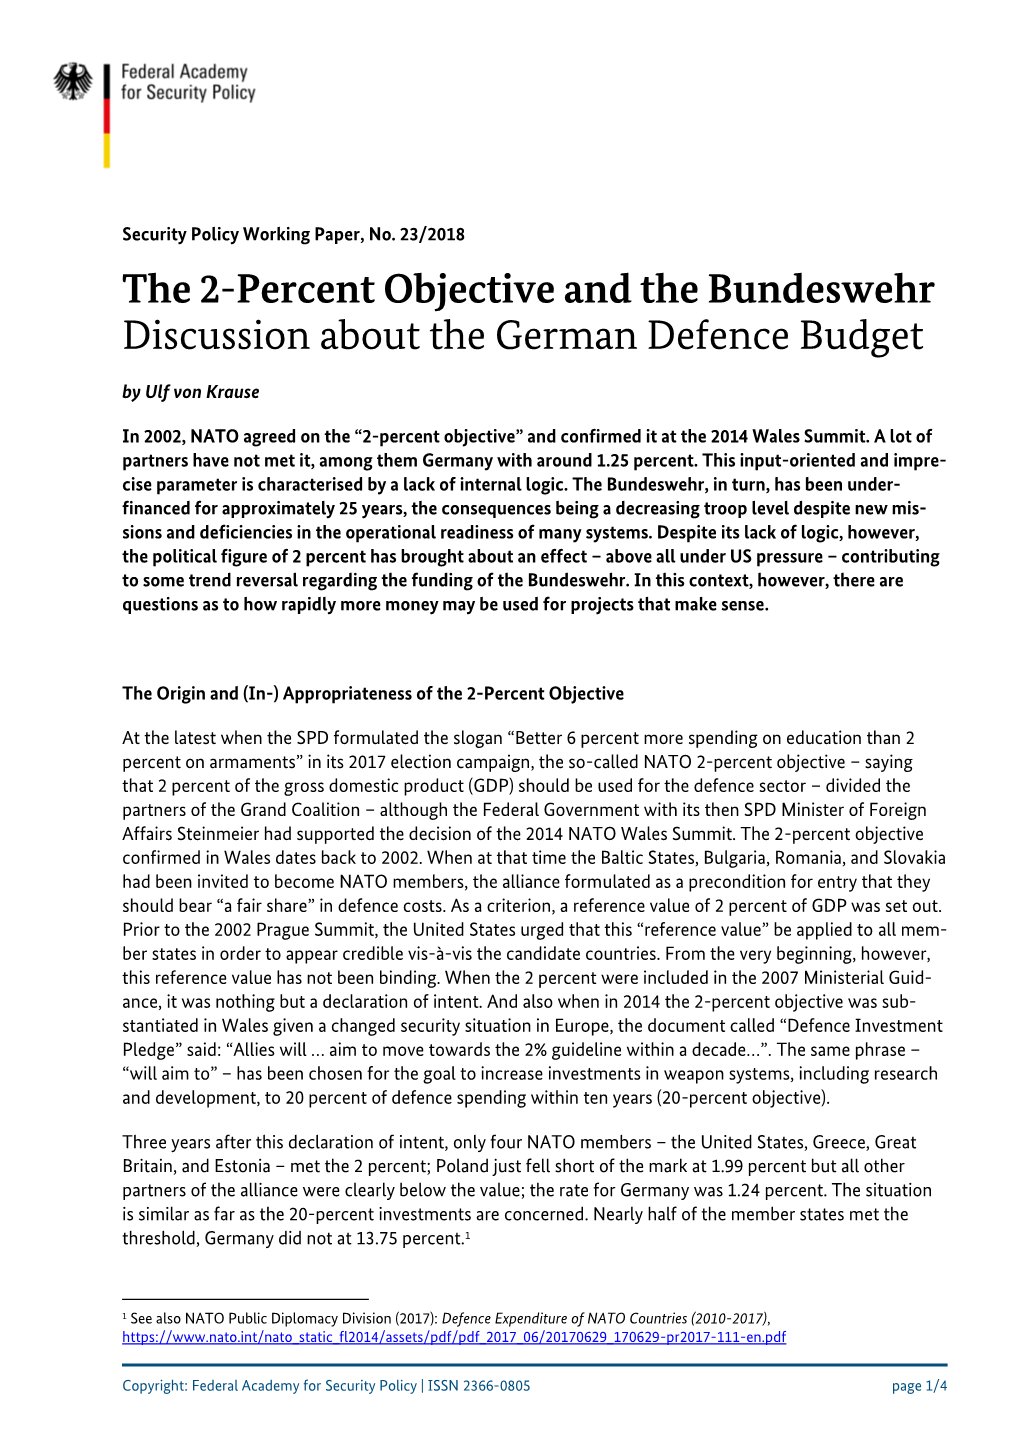 The 2-Percent Objective and the Bundeswehr Discussion About the German Defence Budget by Ulf Von Krause